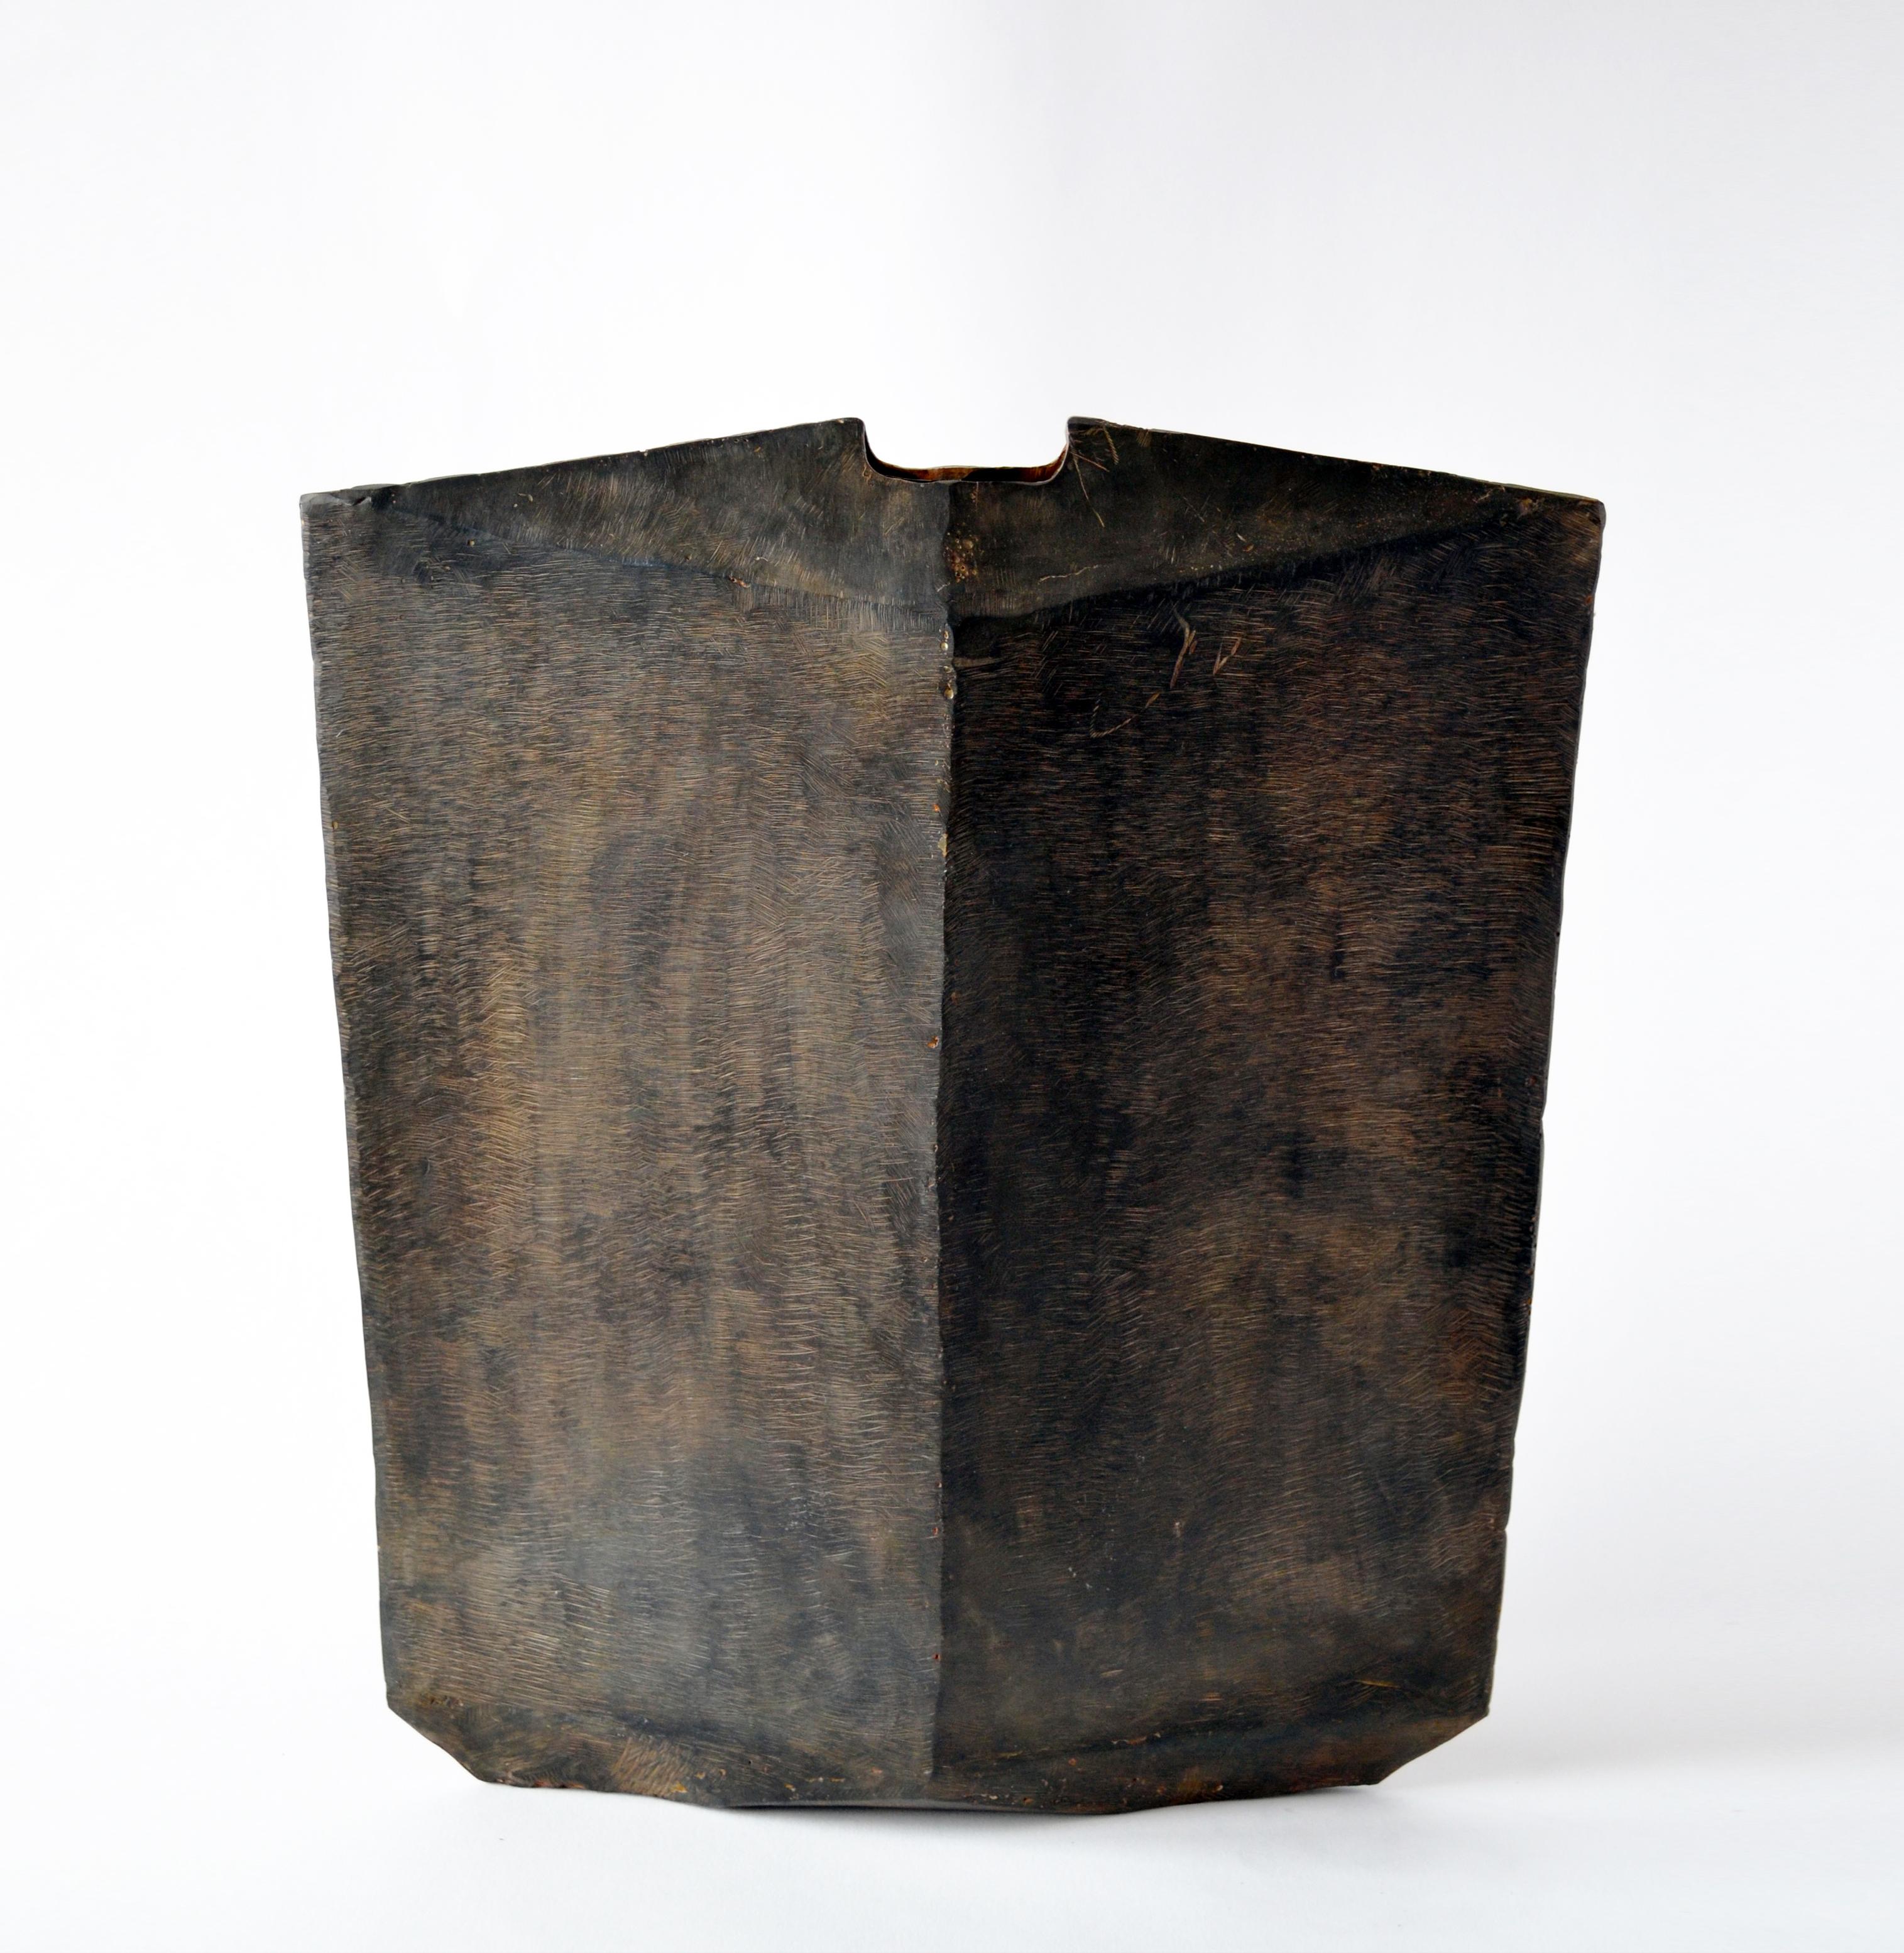 Vessel No 4.
J.M. Szymanski
d. 2017
Blackened and waxed iron

This is a unique architectural object made entirely of iron. J.M. Szymanski uses a unique process of metal sculpting to achieve these dynamic facets. The object is comprised of 18